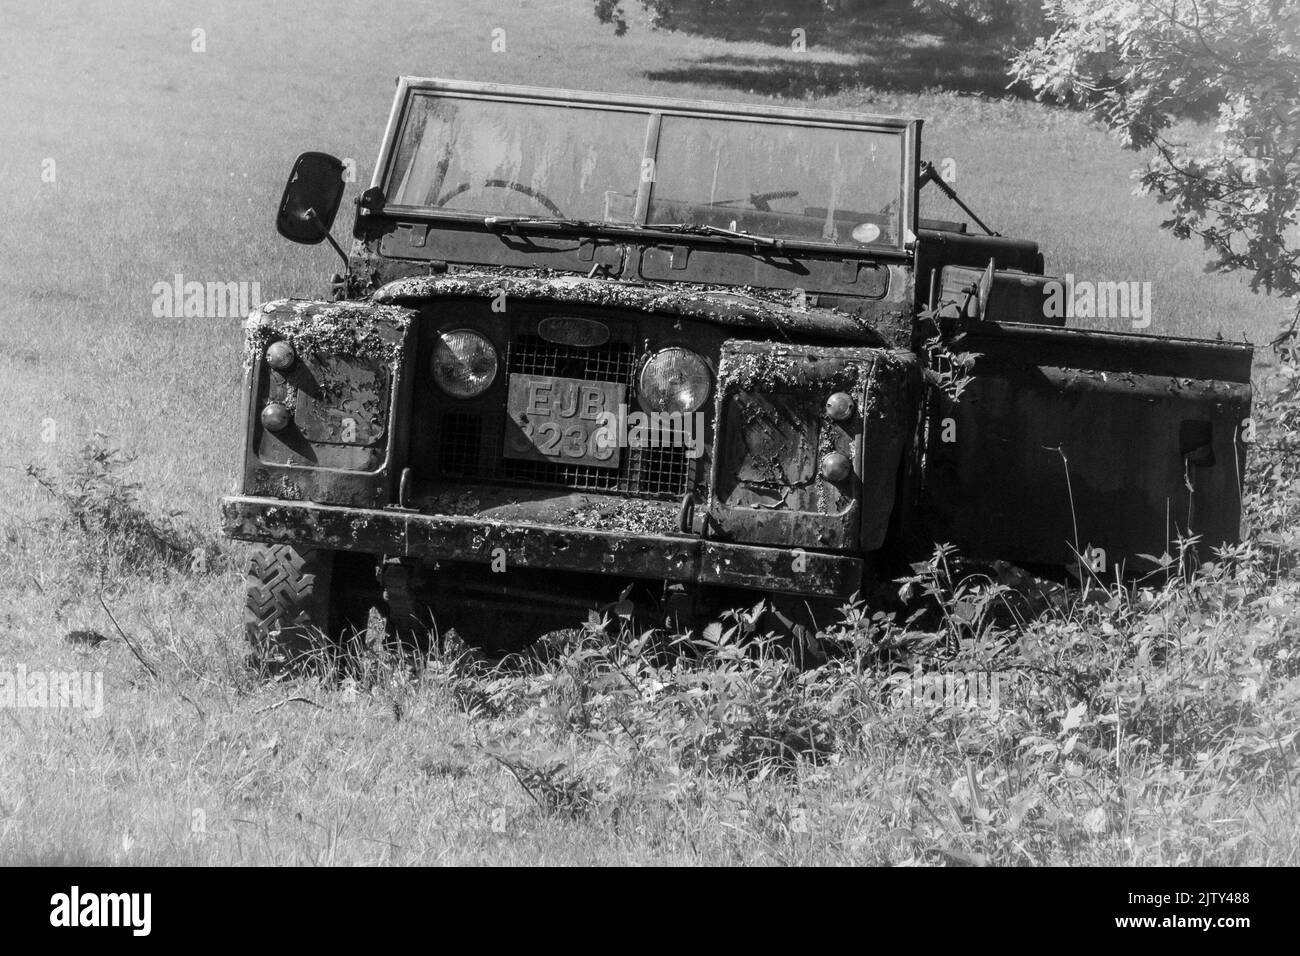 Abandoned disused land rover in black and white Stock Photo